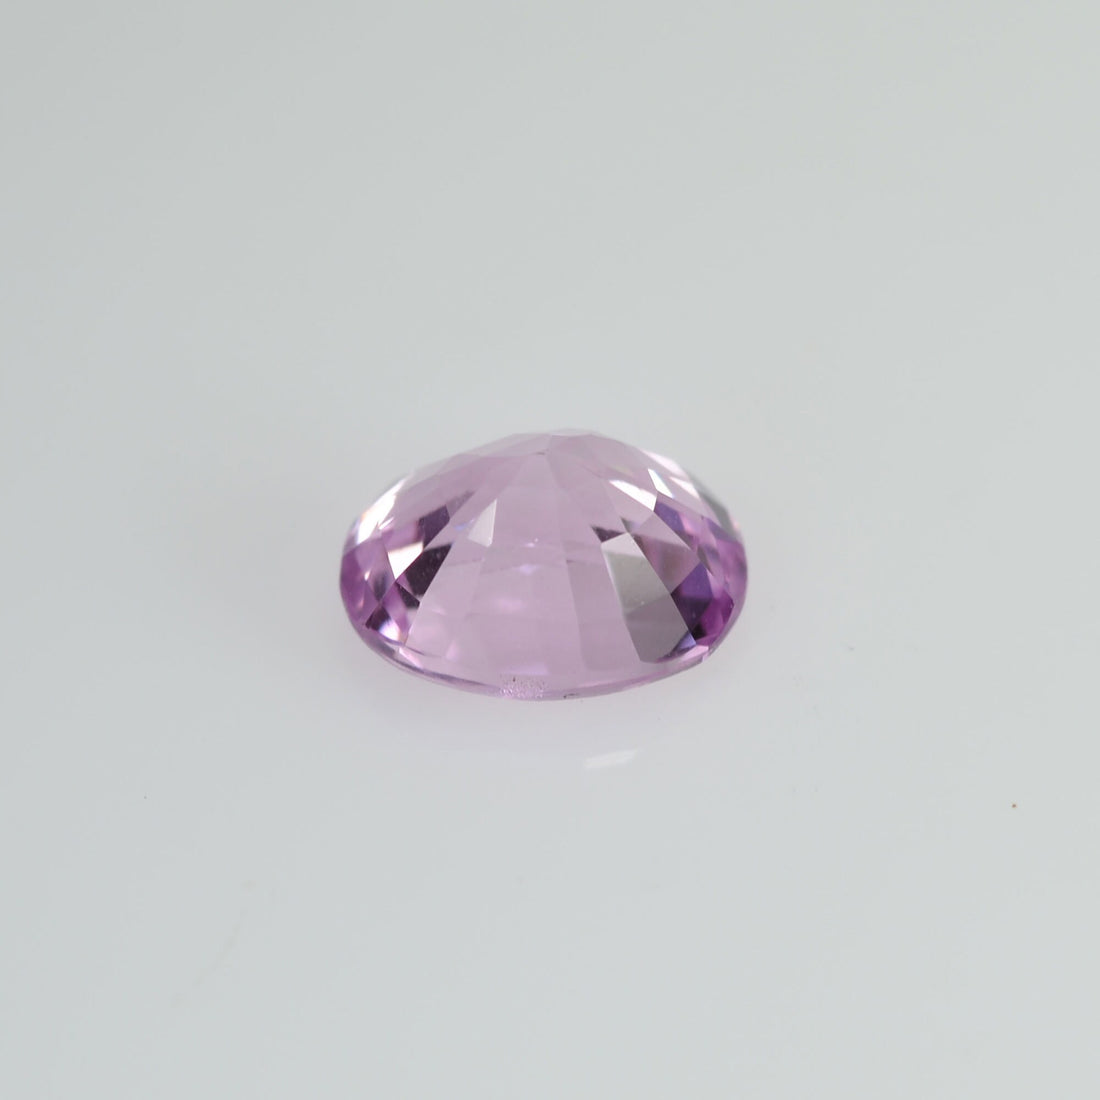 0.47 cts Natural Pink Sapphire Loose Gemstone oval Cut